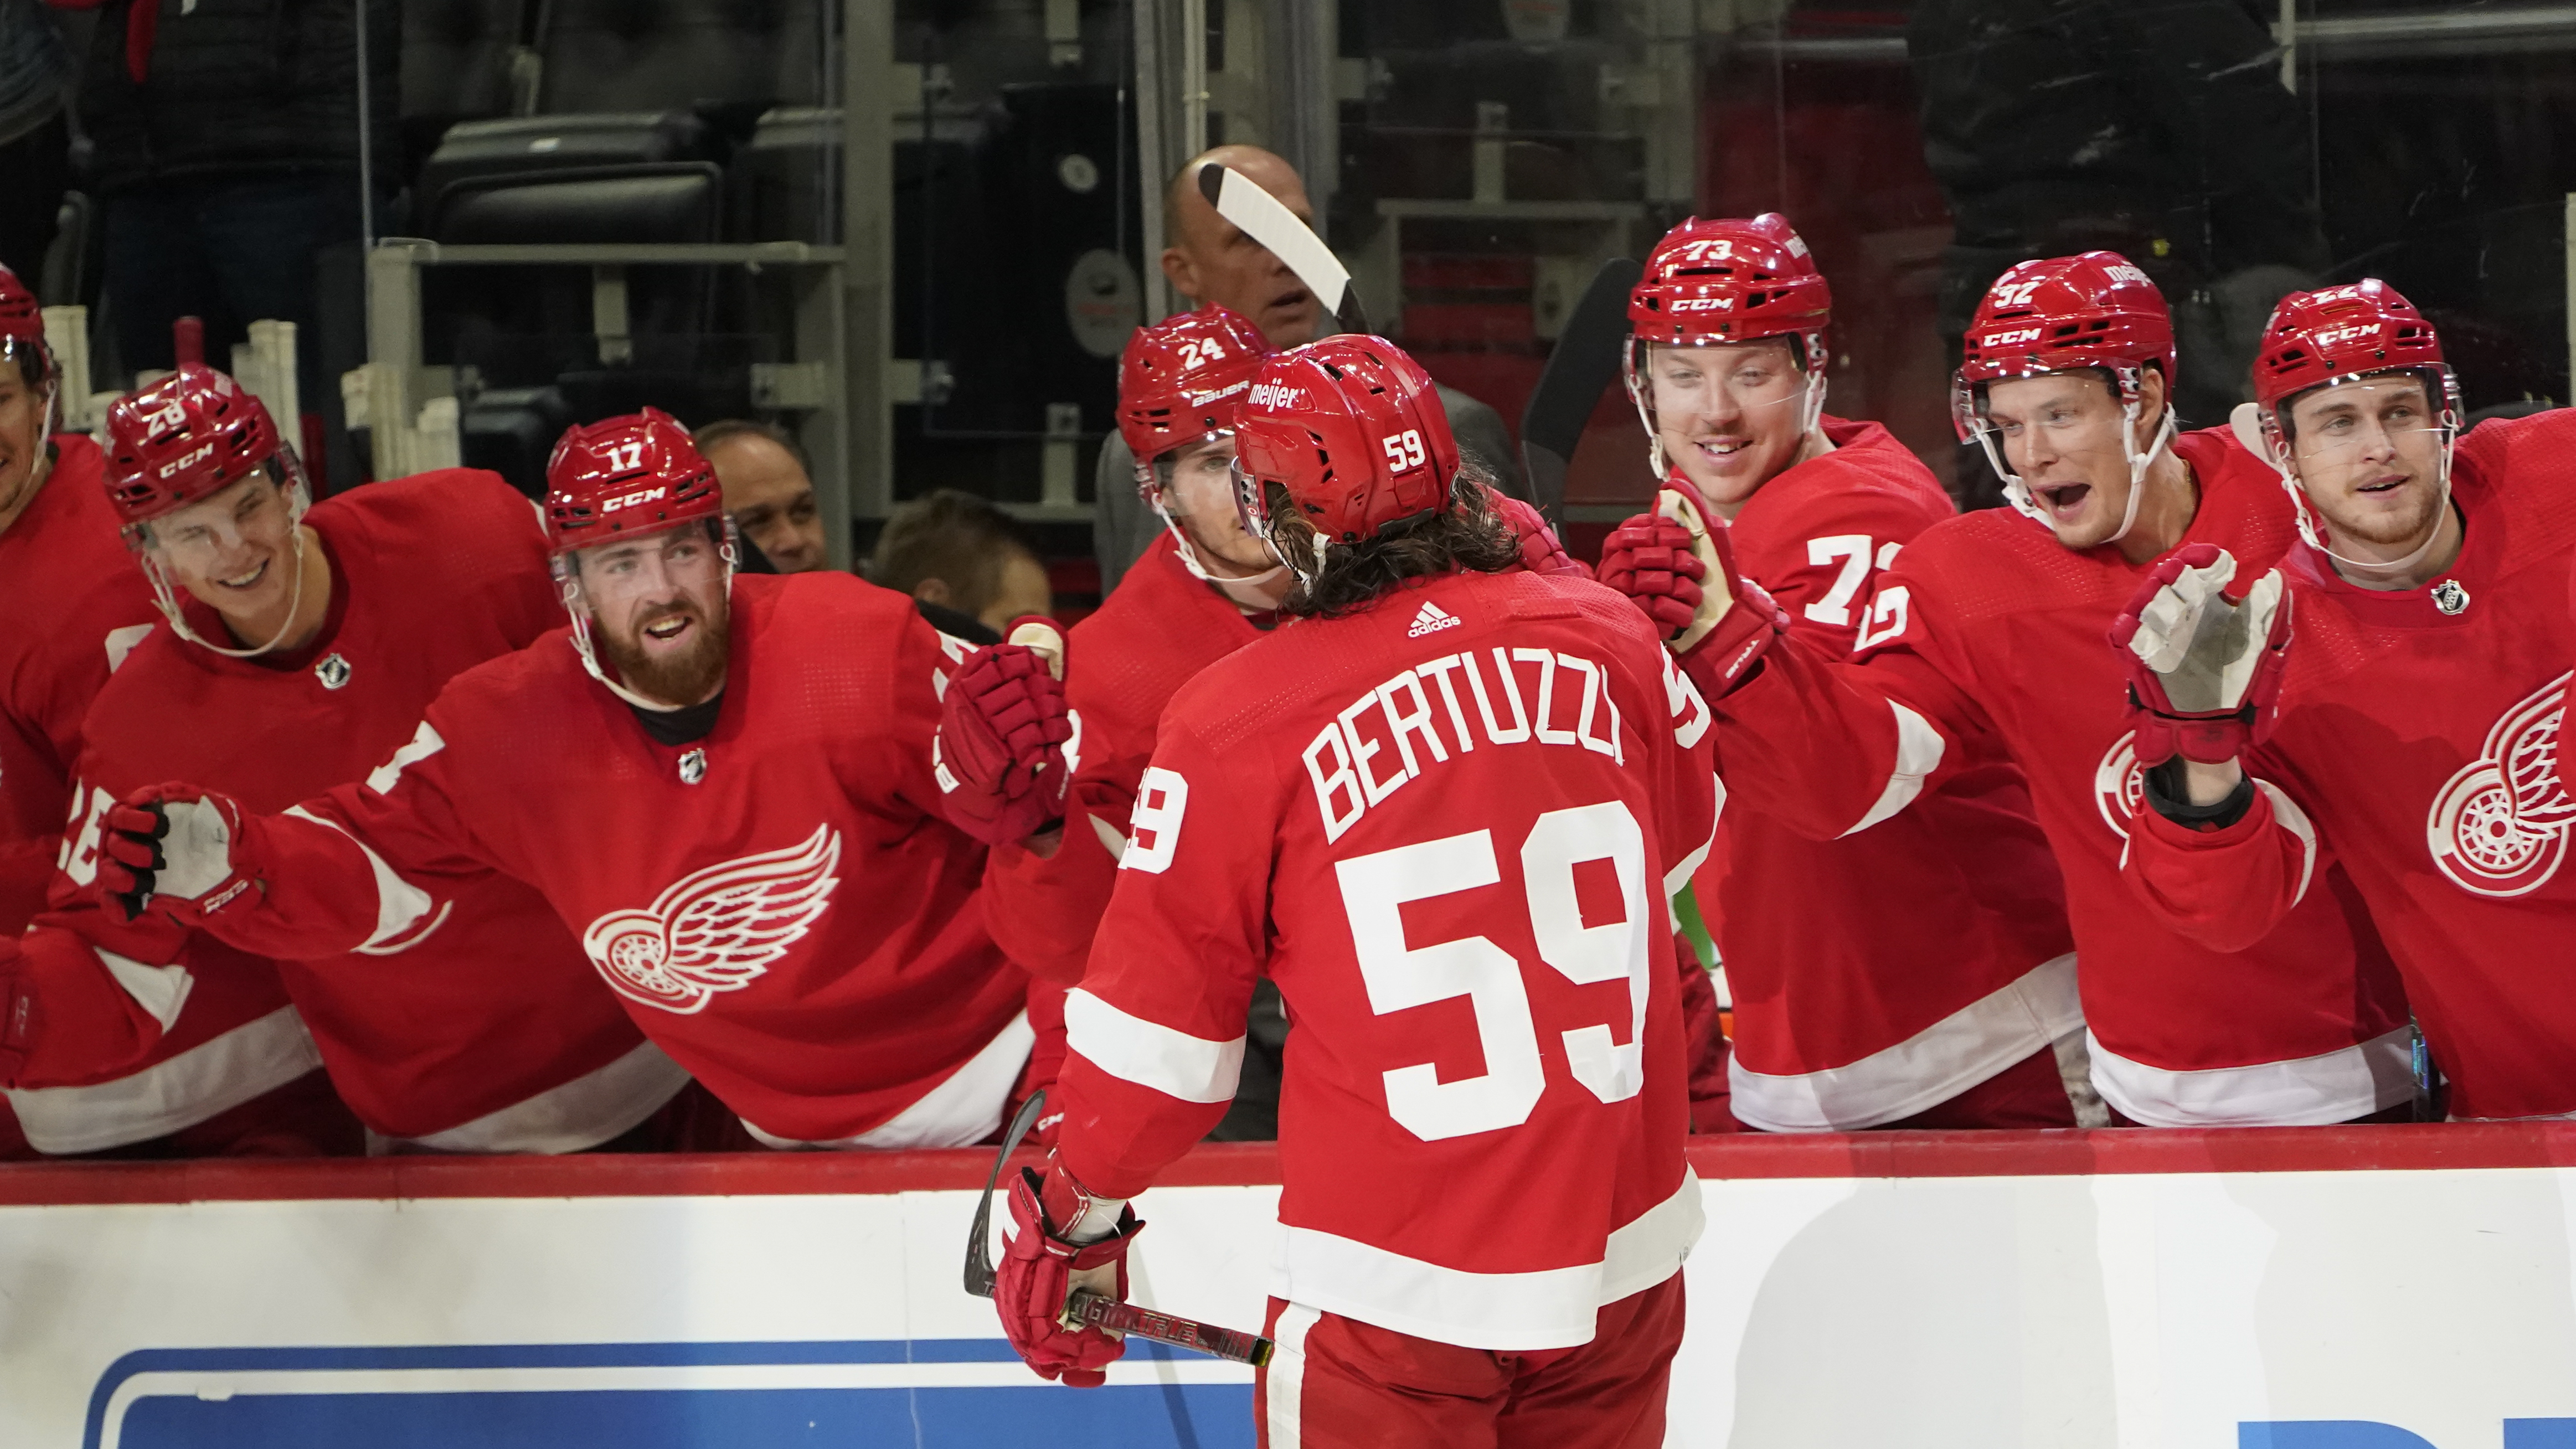 Nicklas Lidstrom's first career hat trick lifts Red Wings past